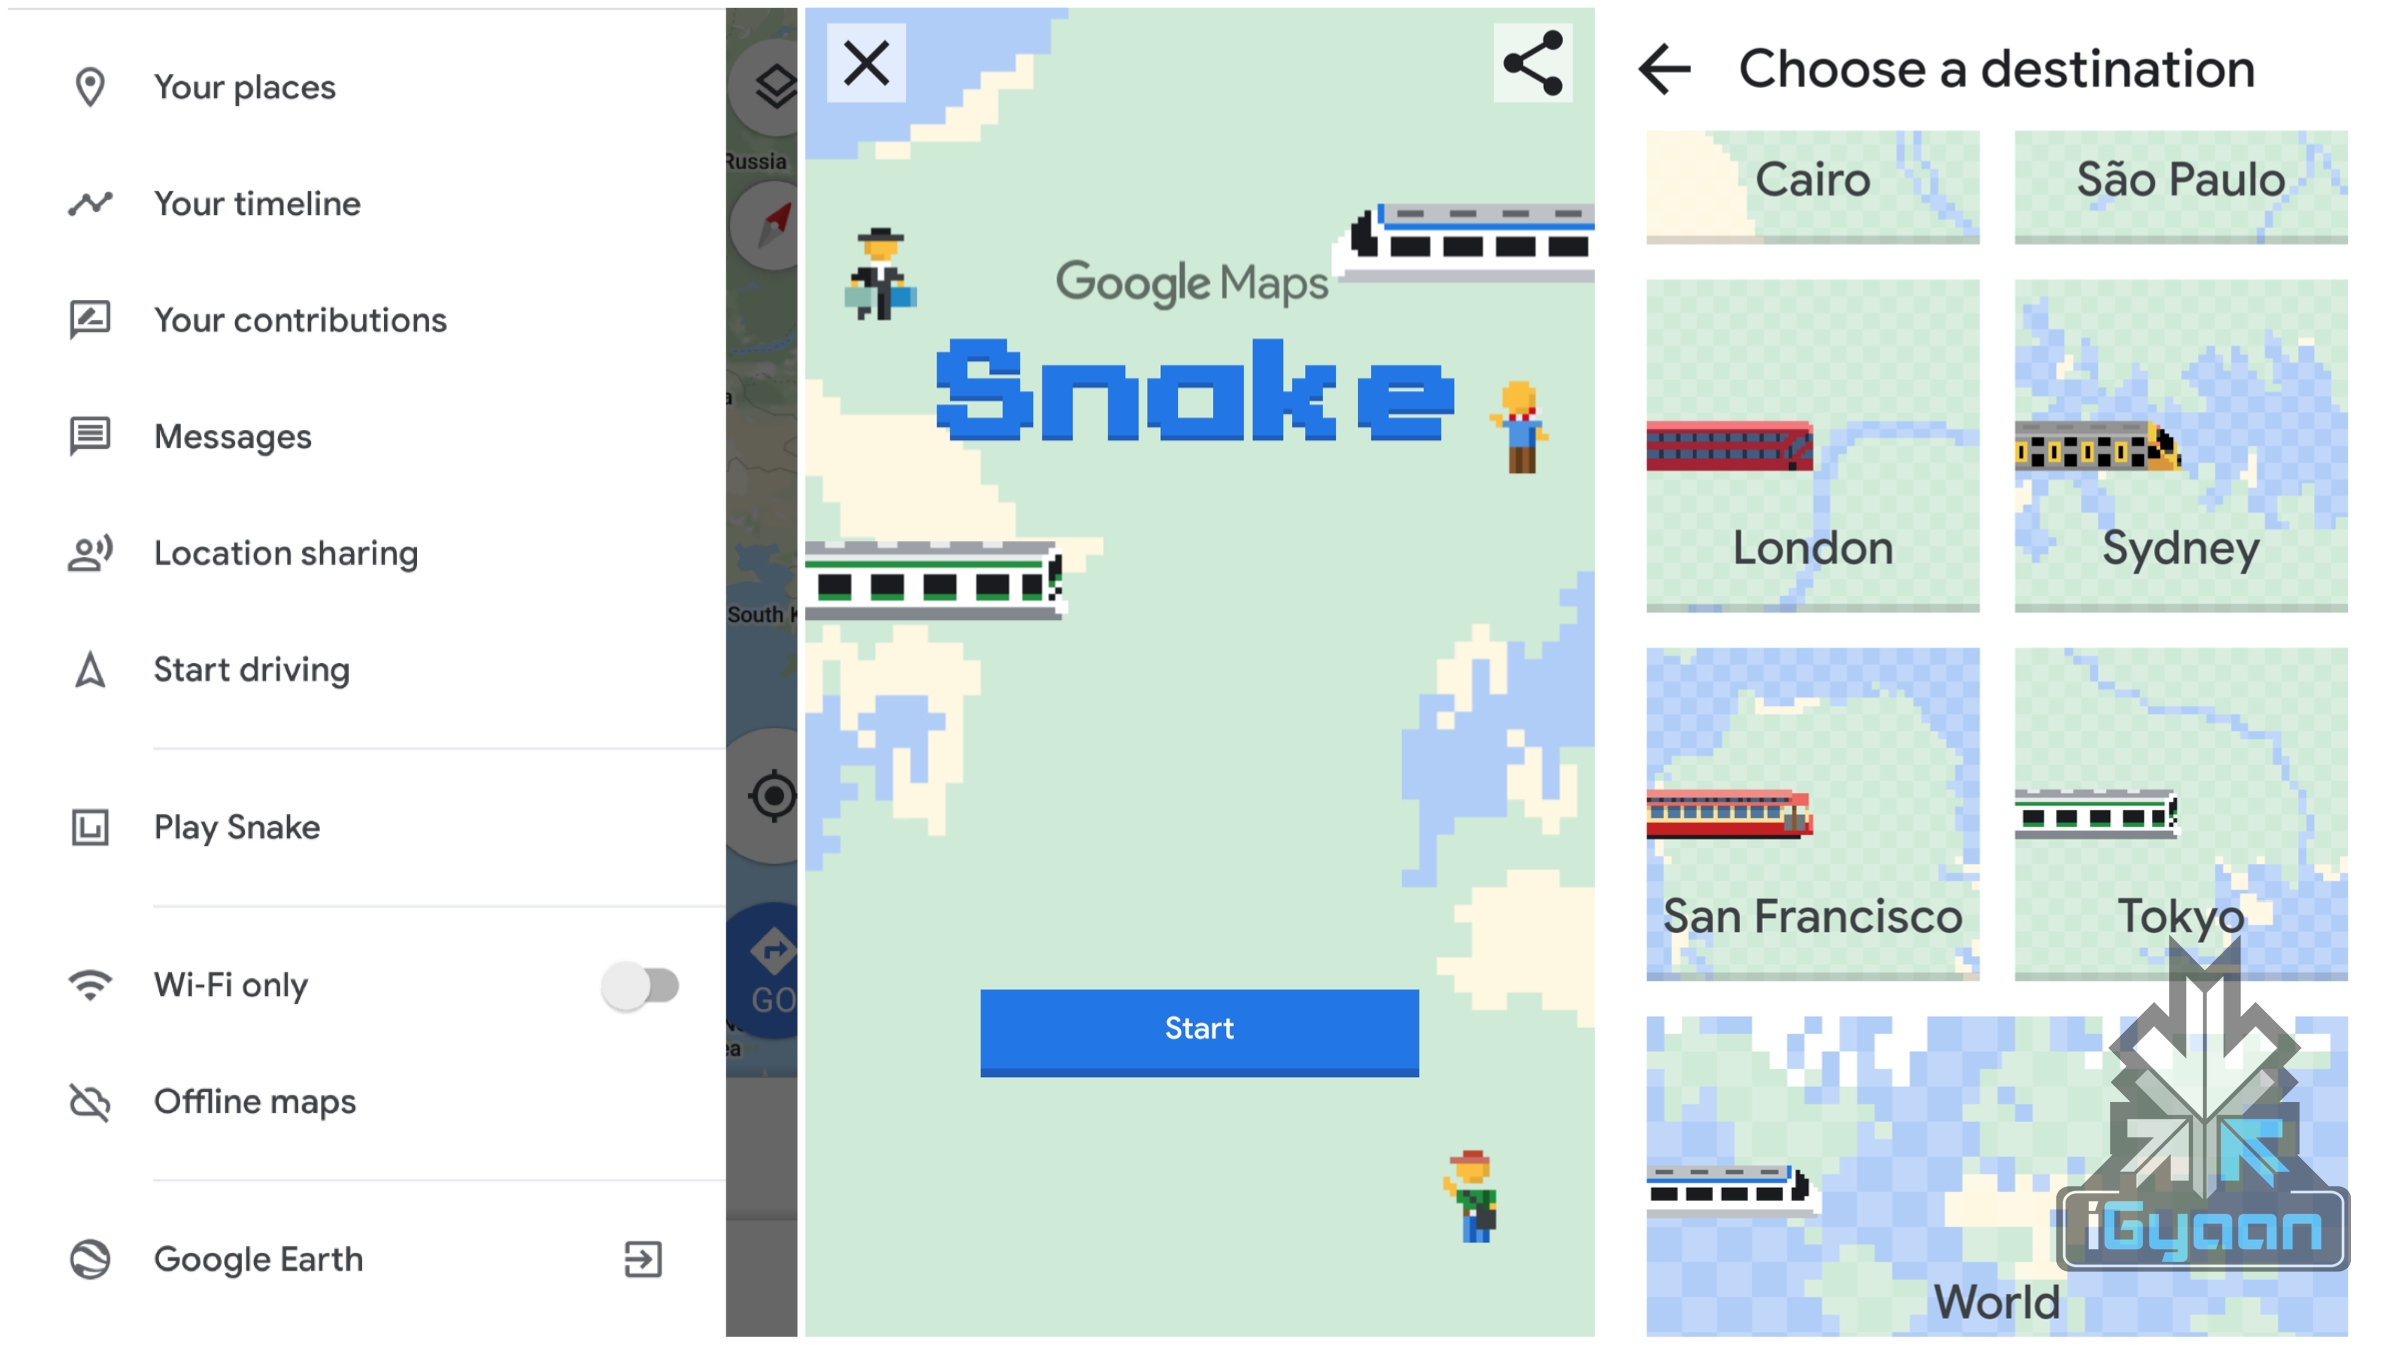 Snake Classic - The Snake Game - Apps on Google Play